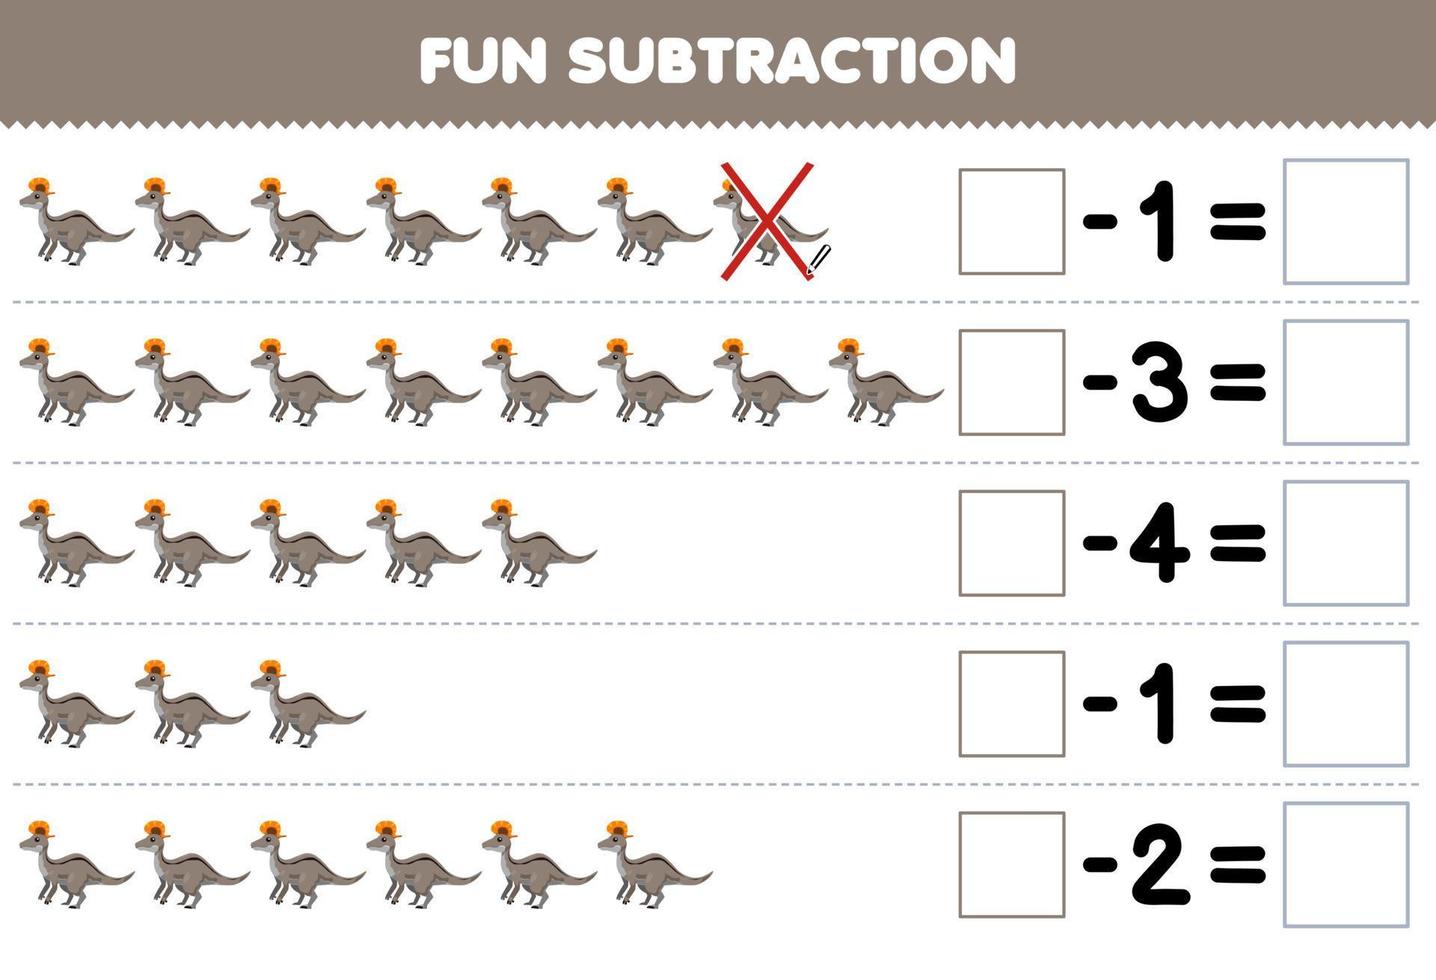 Education game for children fun subtraction by counting cute cartoon lambeosaurus in each row and eliminating it printable prehistoric dinosaur worksheet vector